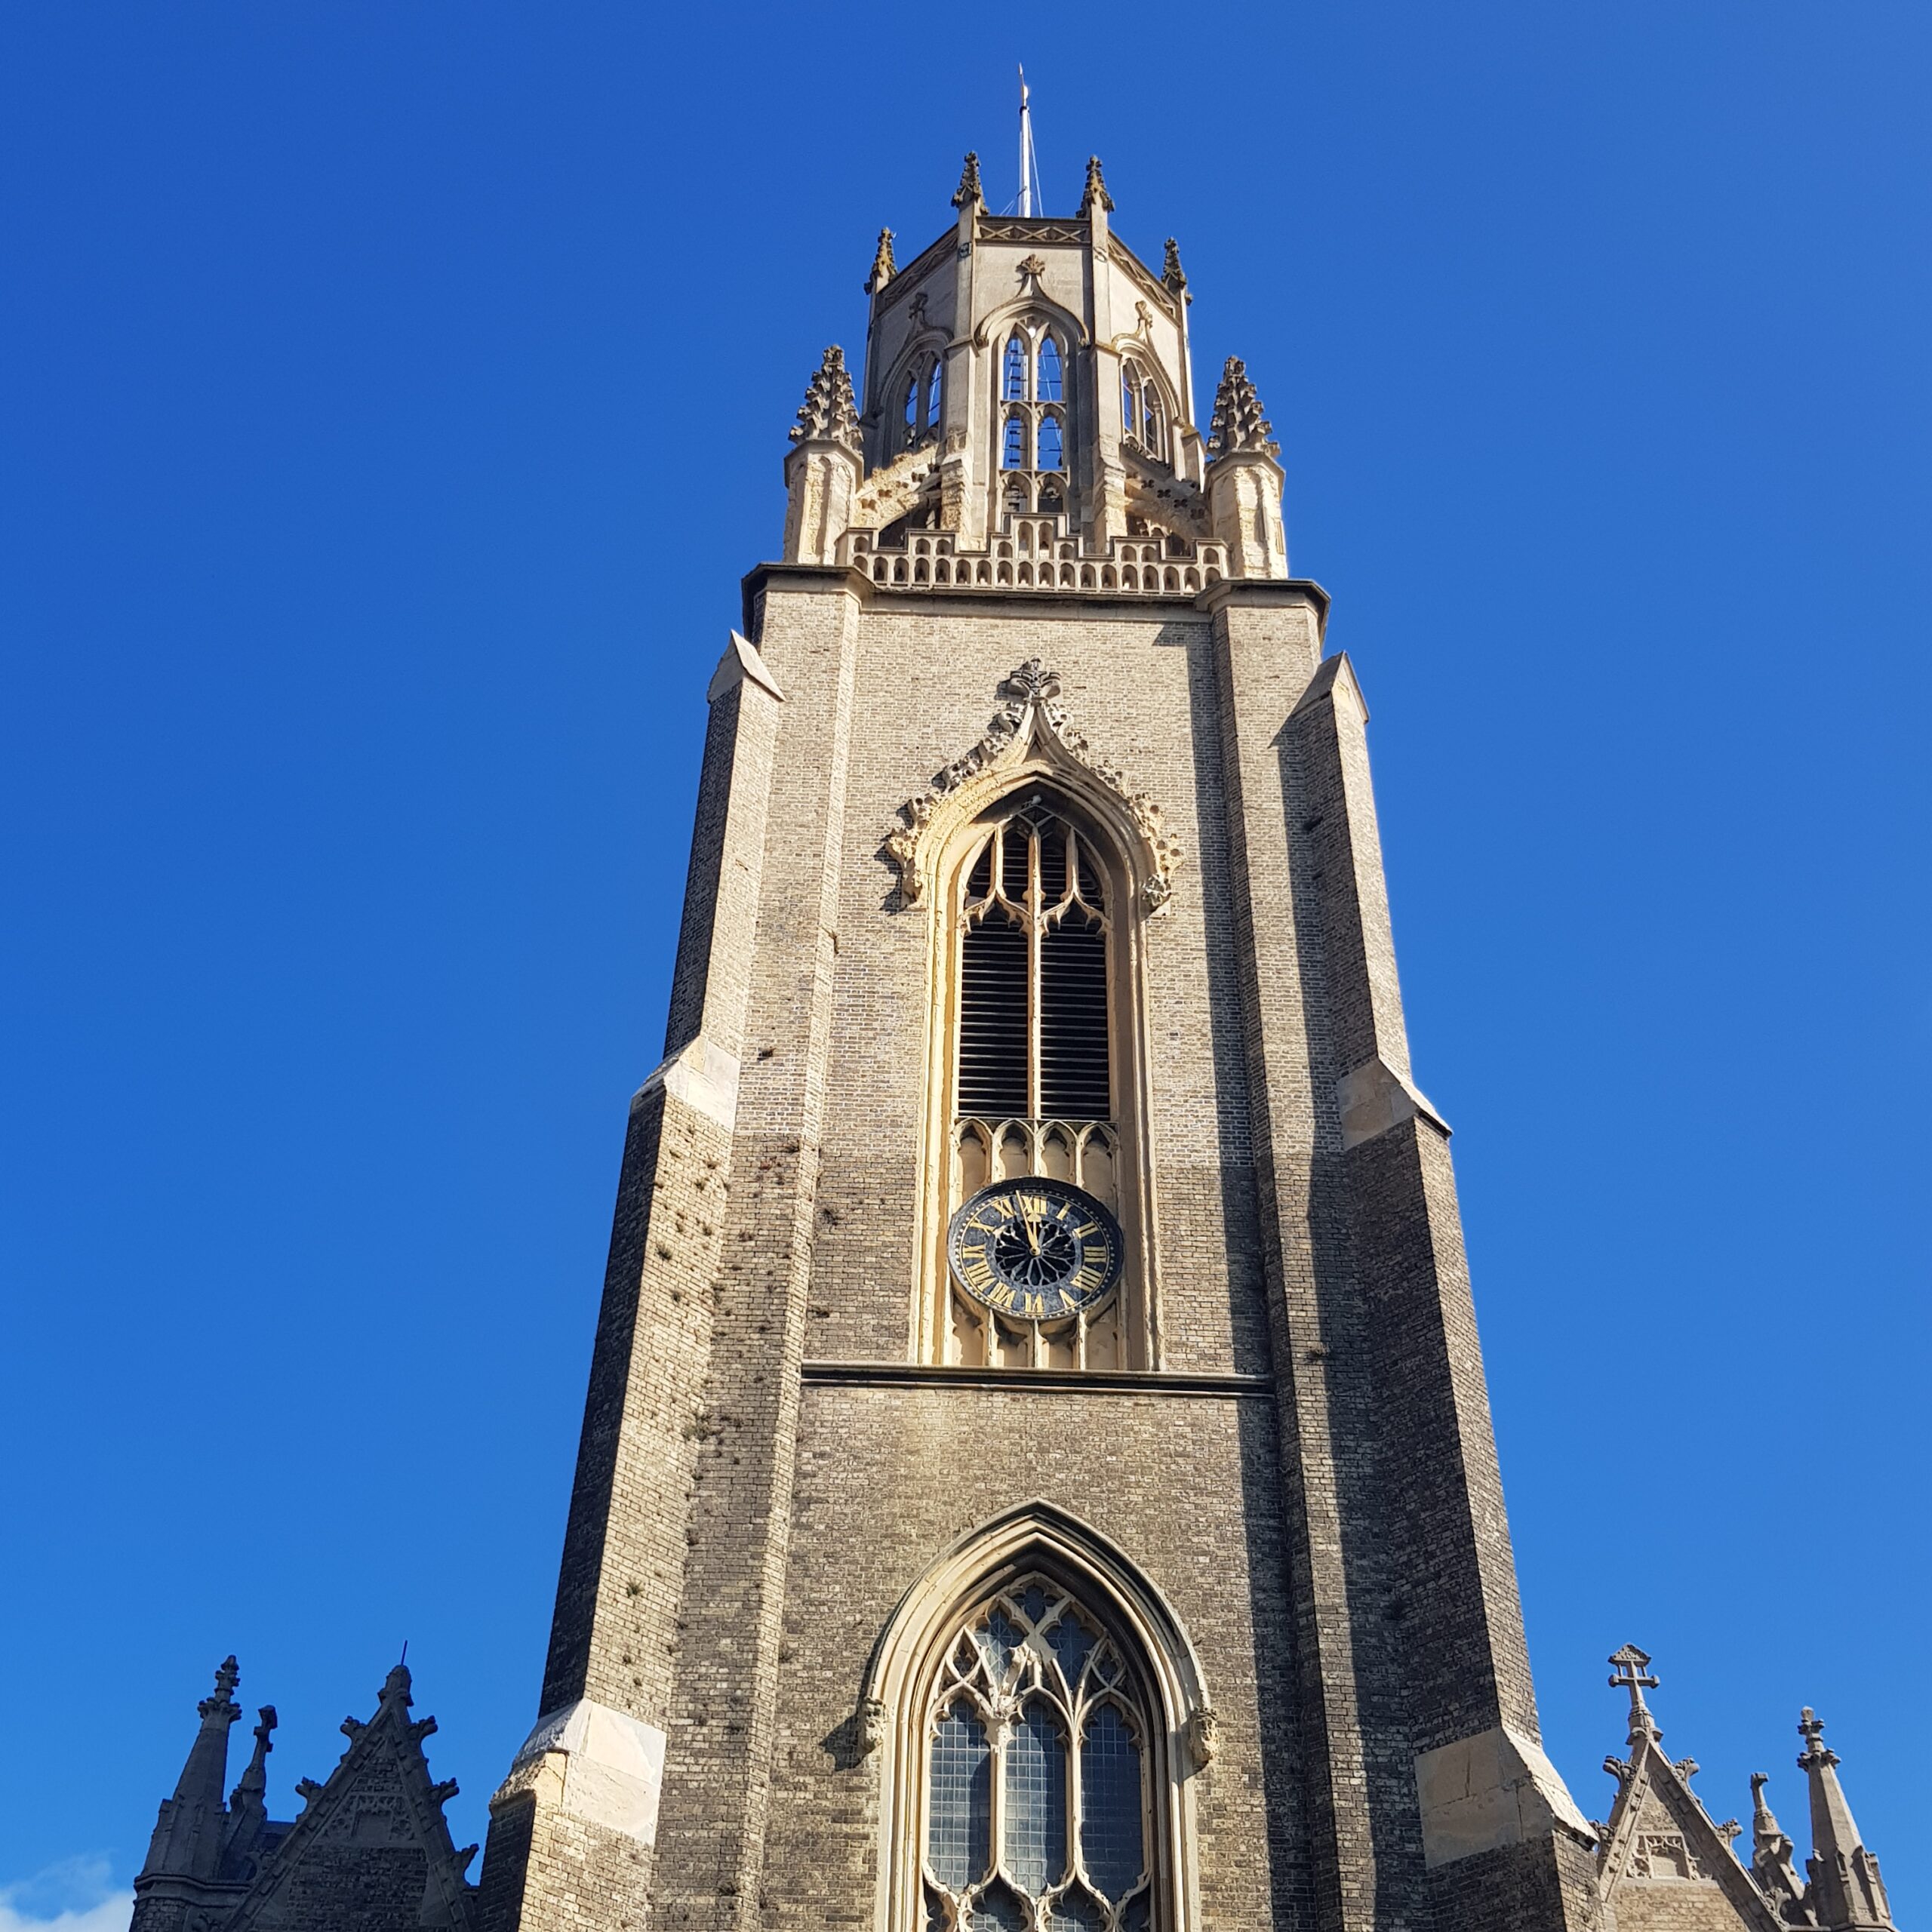 St George’s Church – Project 200